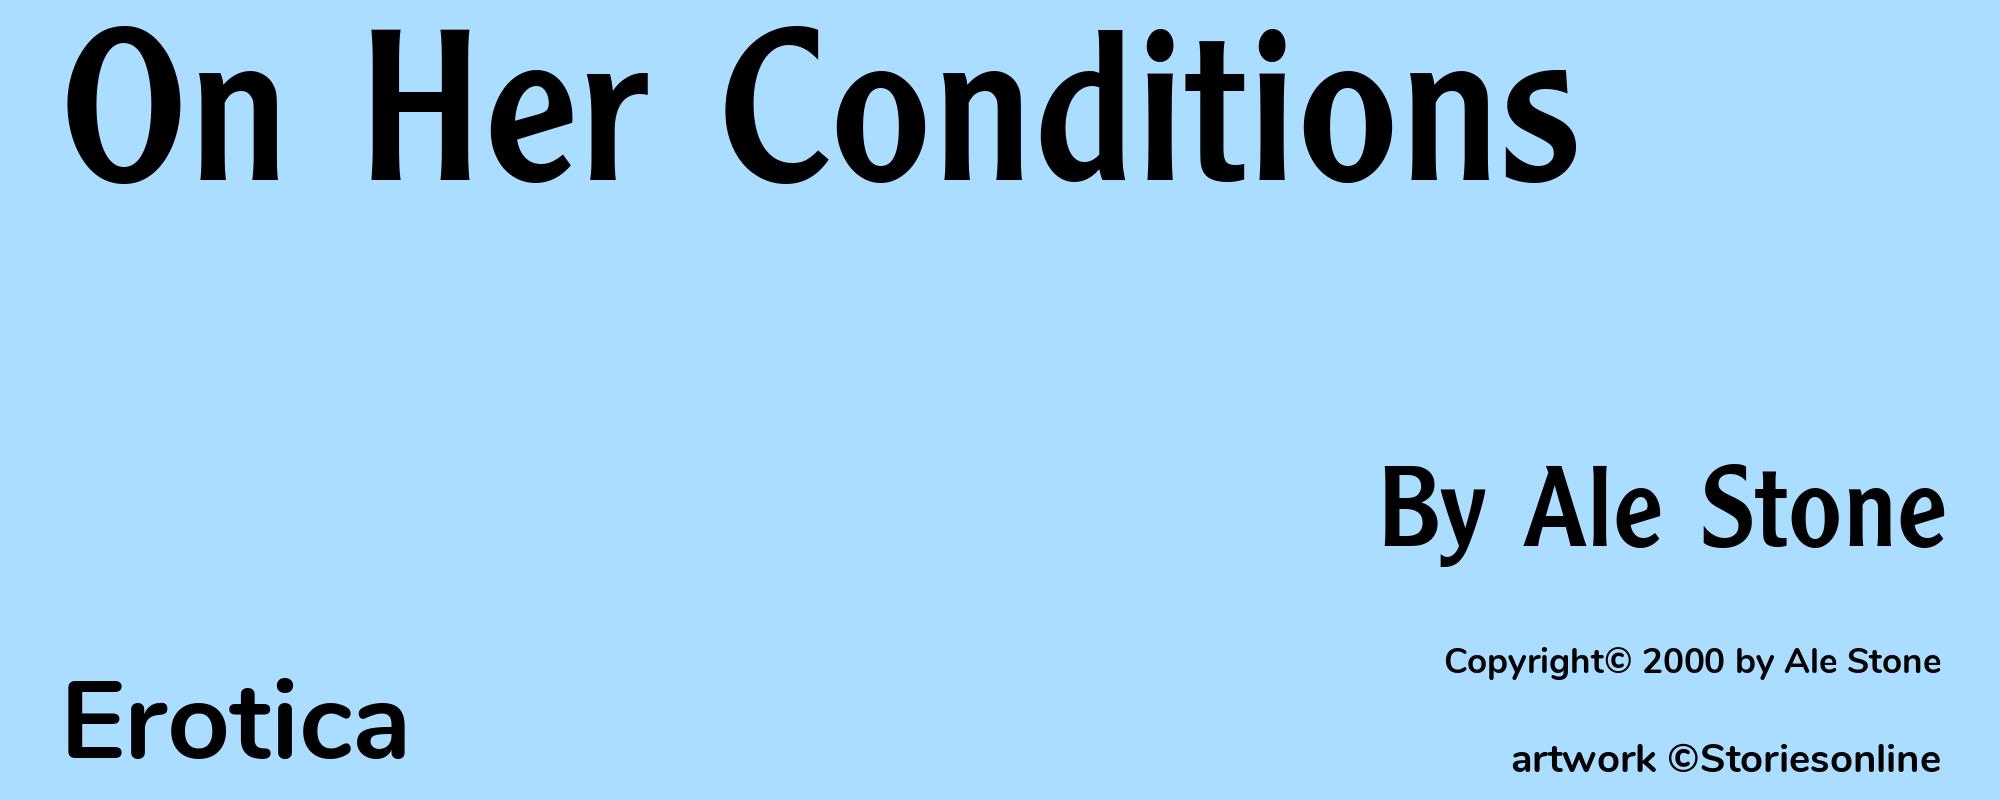 On Her Conditions - Cover